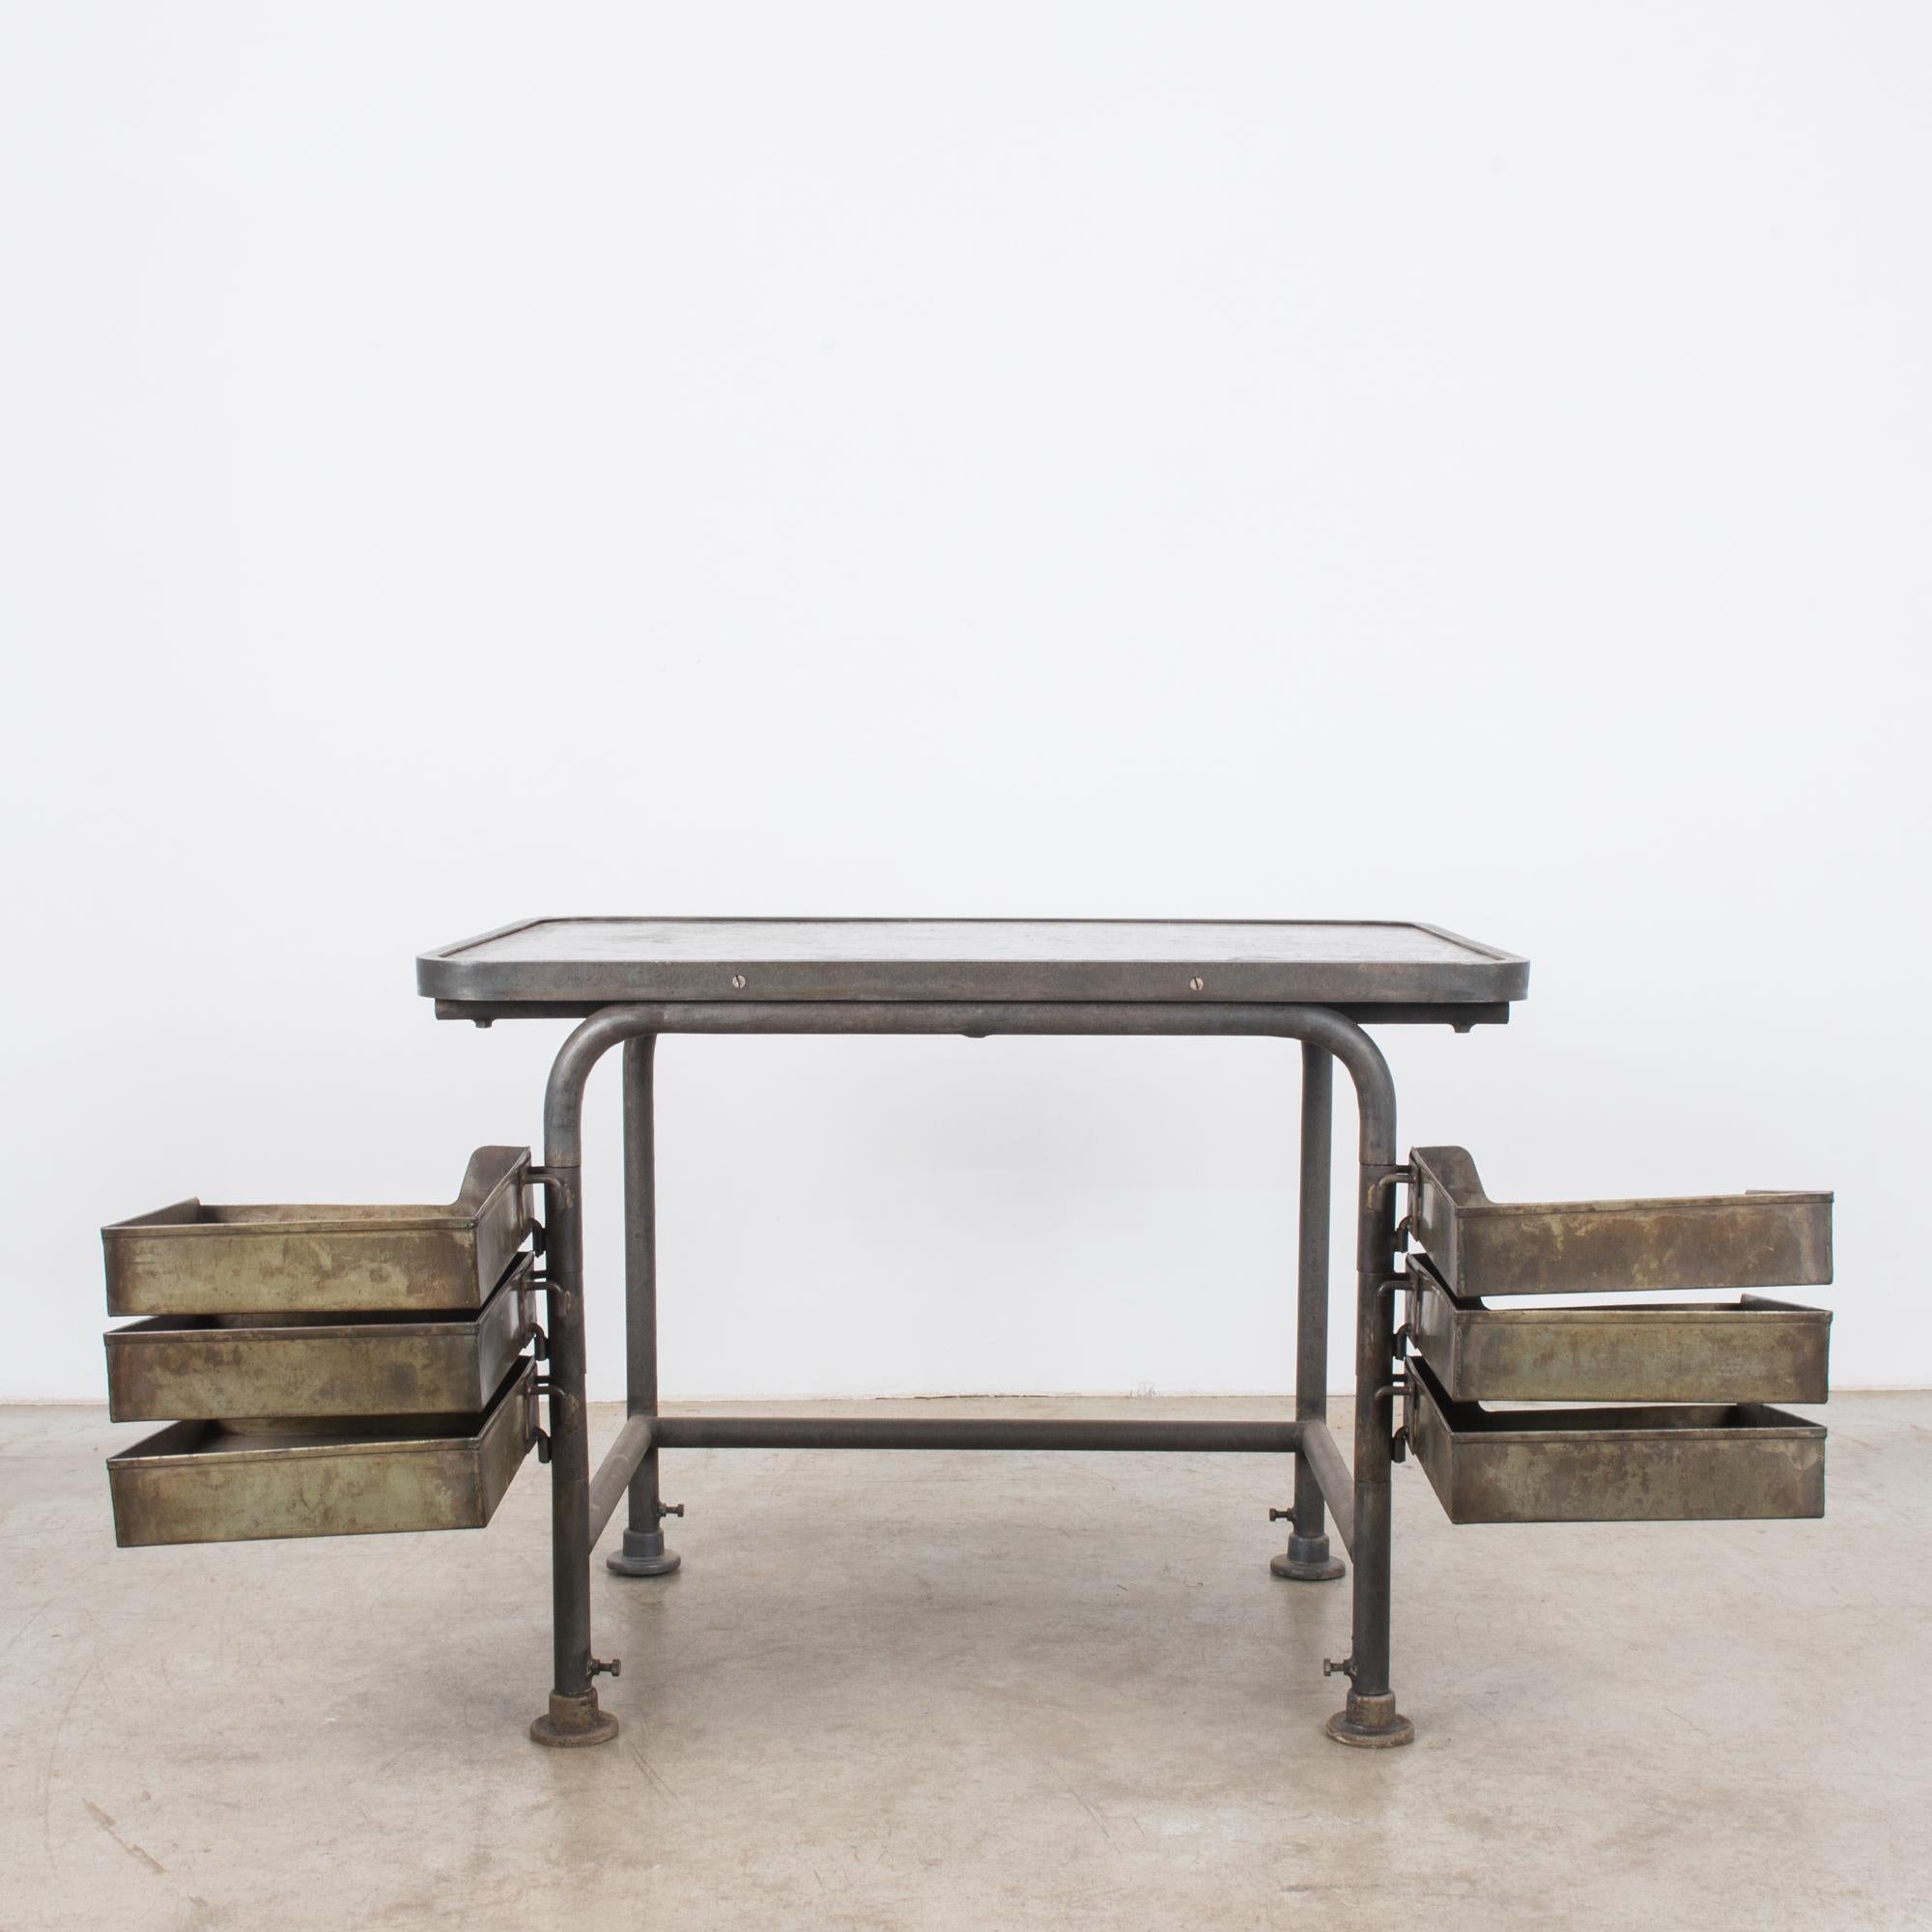 This metal work table was made in Belgium, circa 1950. Tubular steel construction is sturdy while refined, a practical and sleek construction designed for efficient work-- six drawer trays swilled out for easy access. Belgium is known for